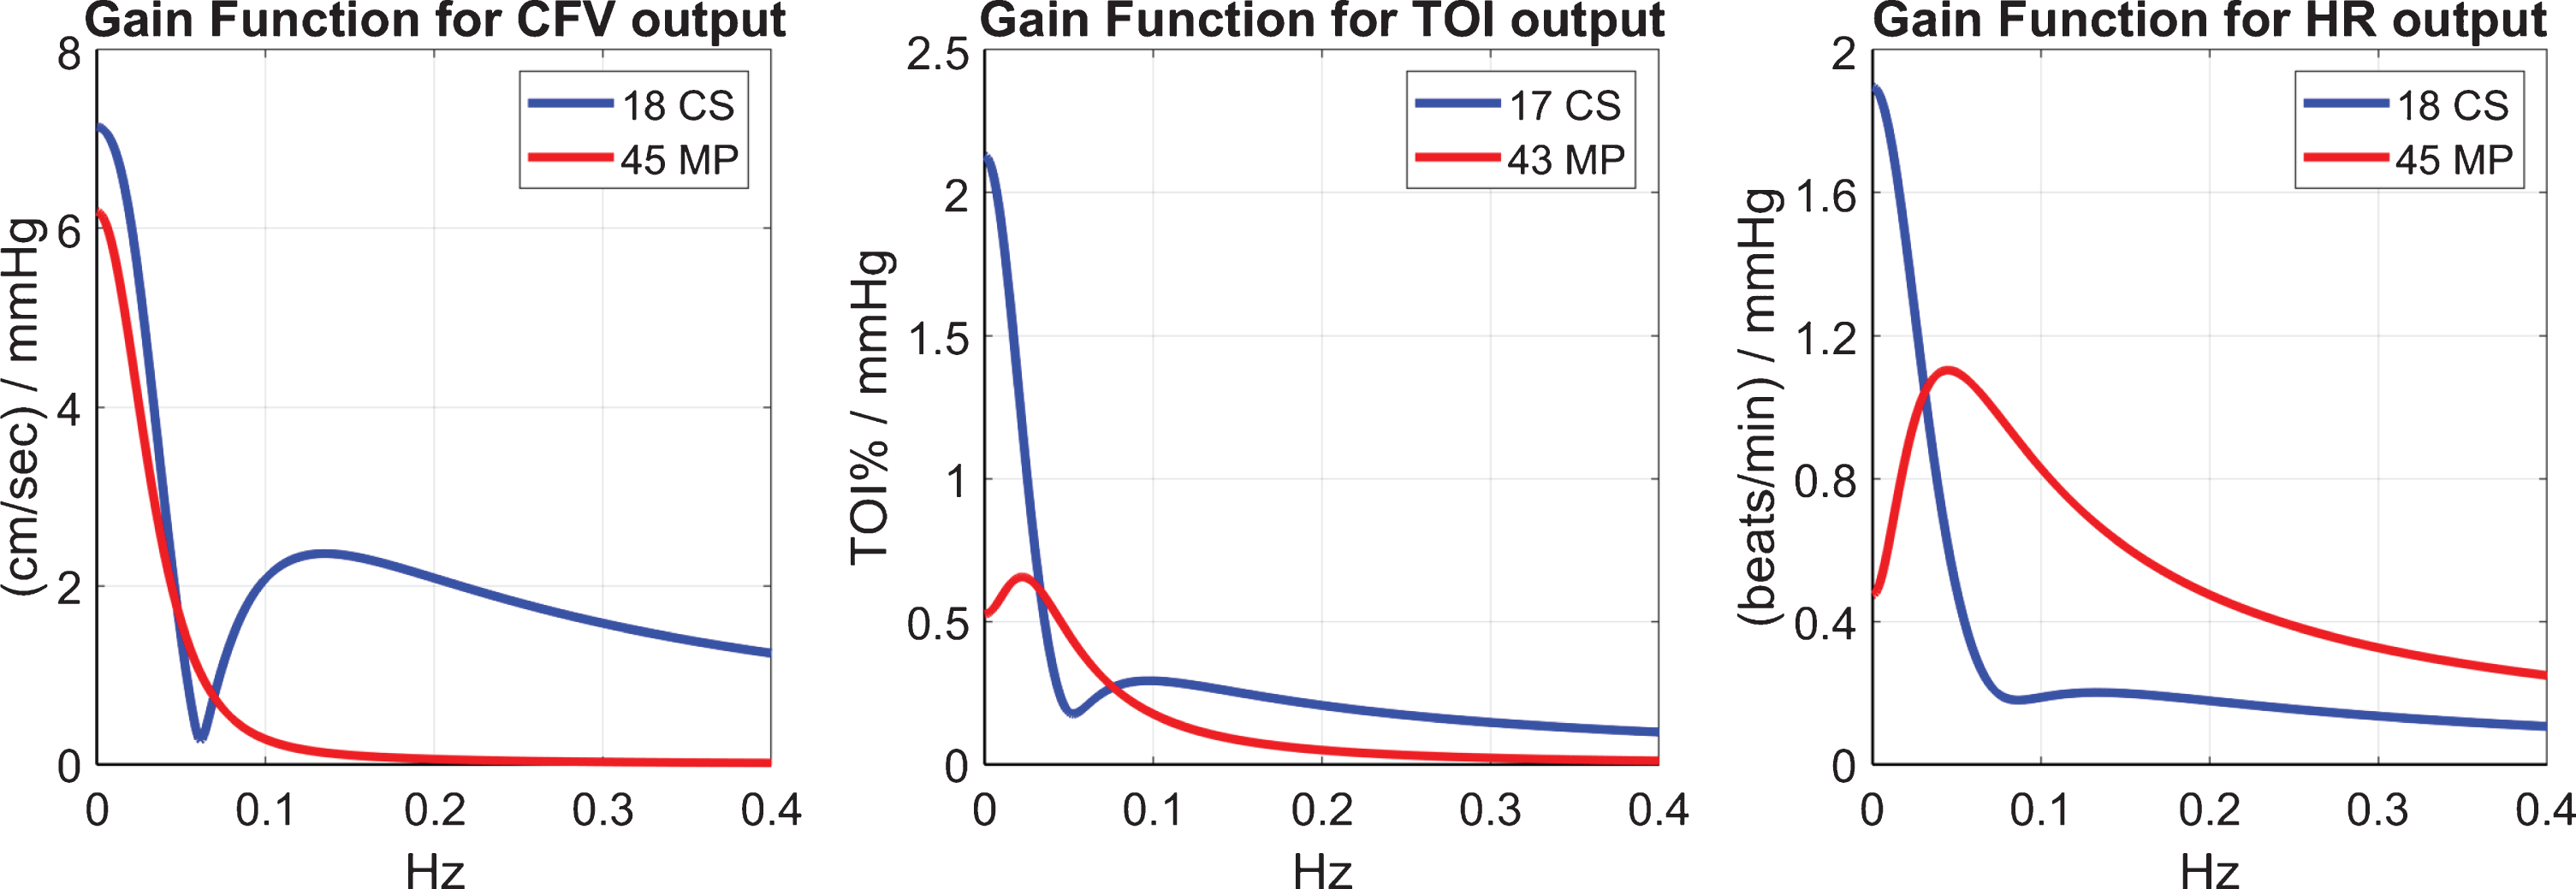 The gain of the Transfer Functions (Fourier Transform magnitudes) of the kernels for CO2 input and CFV output (left), TOI output (middle) and HR output (right). Notable differences are seen in the low-frequencies between MP and CS, as well as in the location of resonant peaks.